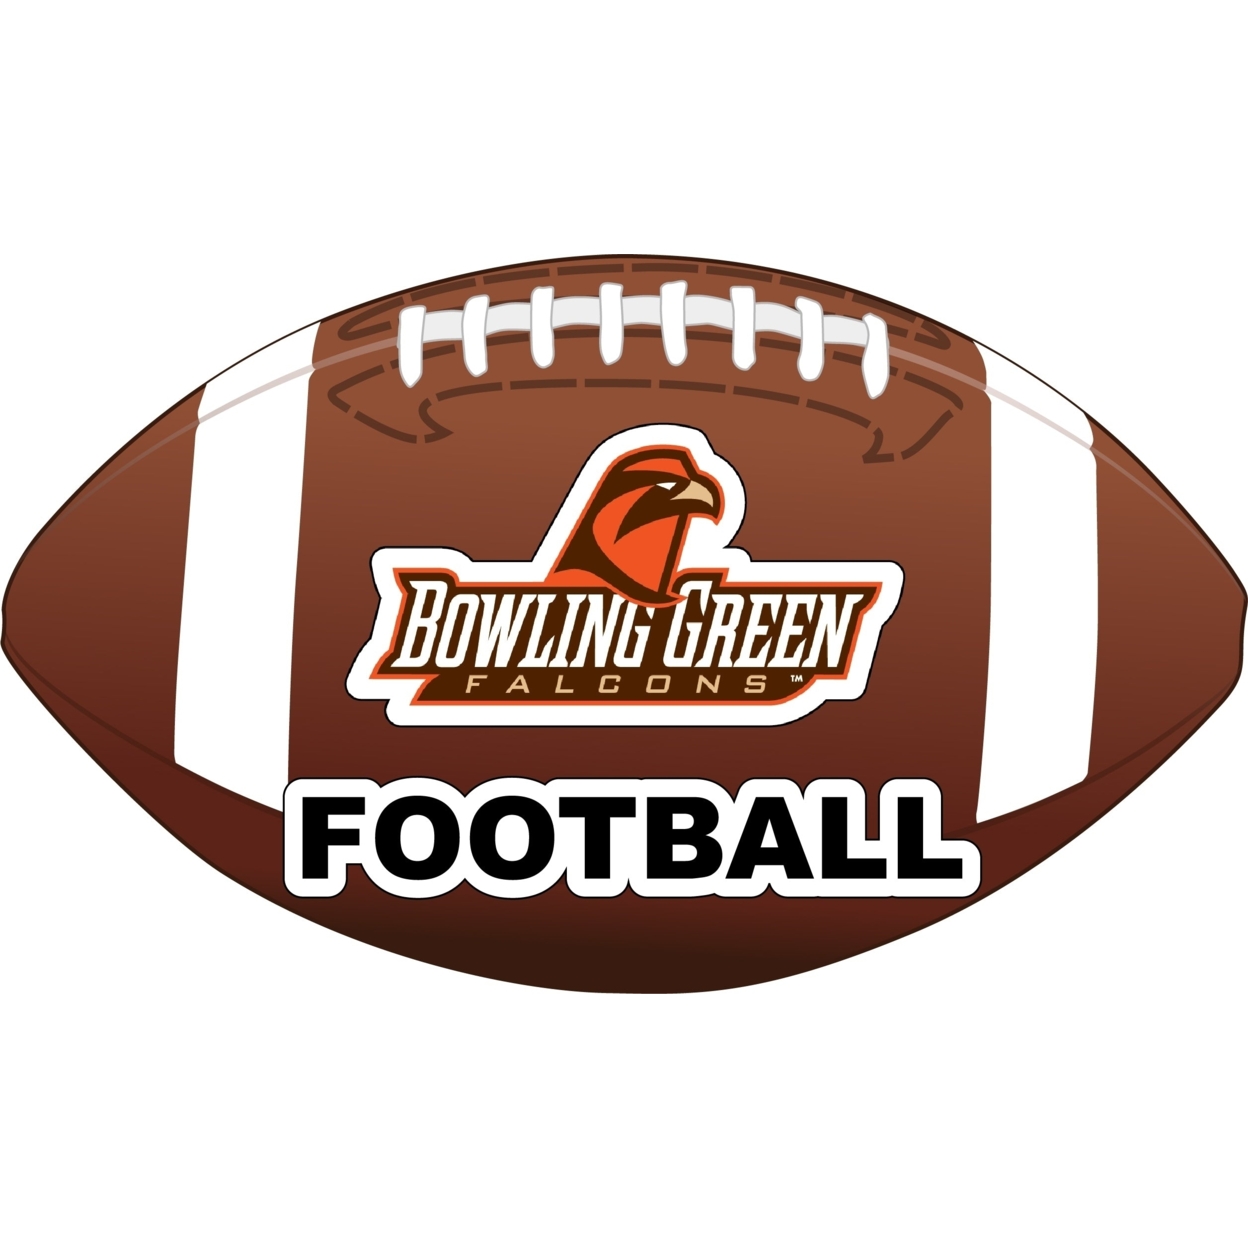 Bowling Green Falcons 4-Inch Round Football Vinyl Decal Sticker